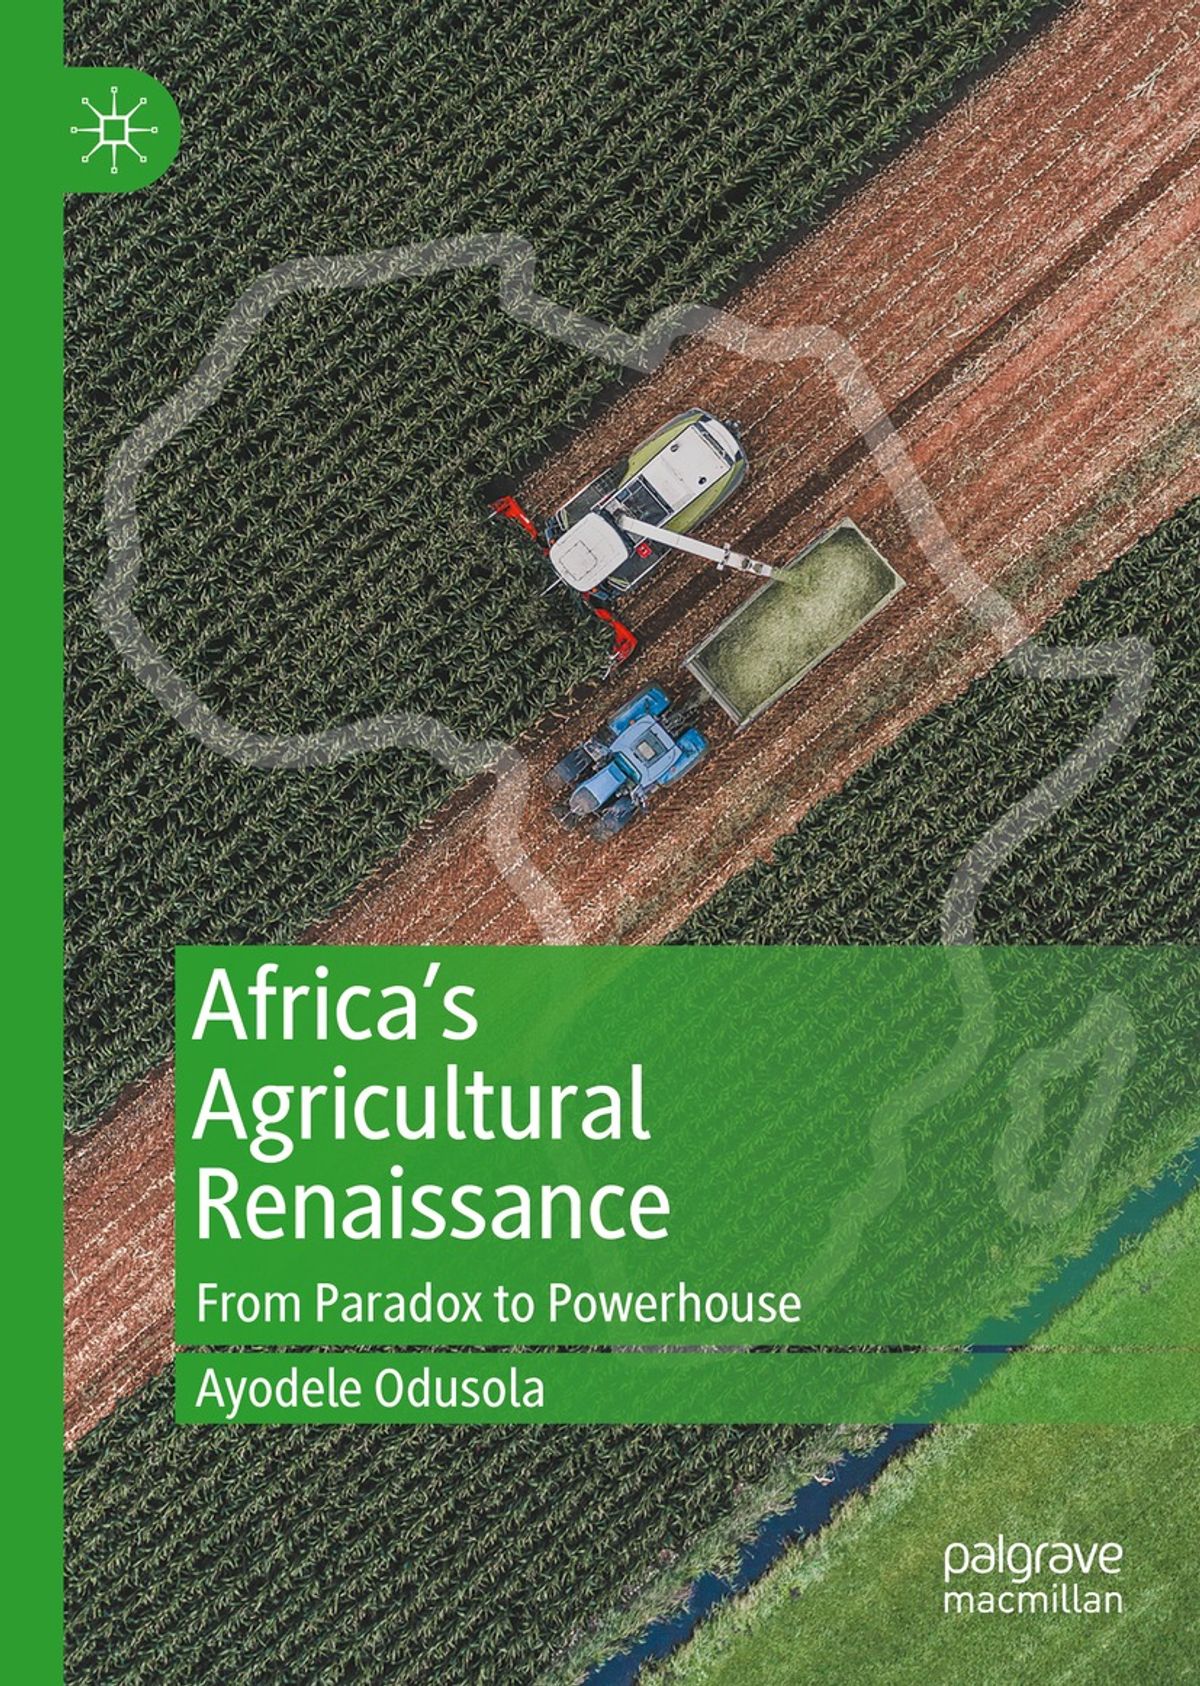 "Africa's Agricultural Renaissance : From Paradox to Powerhouse" (Palgrave Macmillan, 2021) &copy; DR